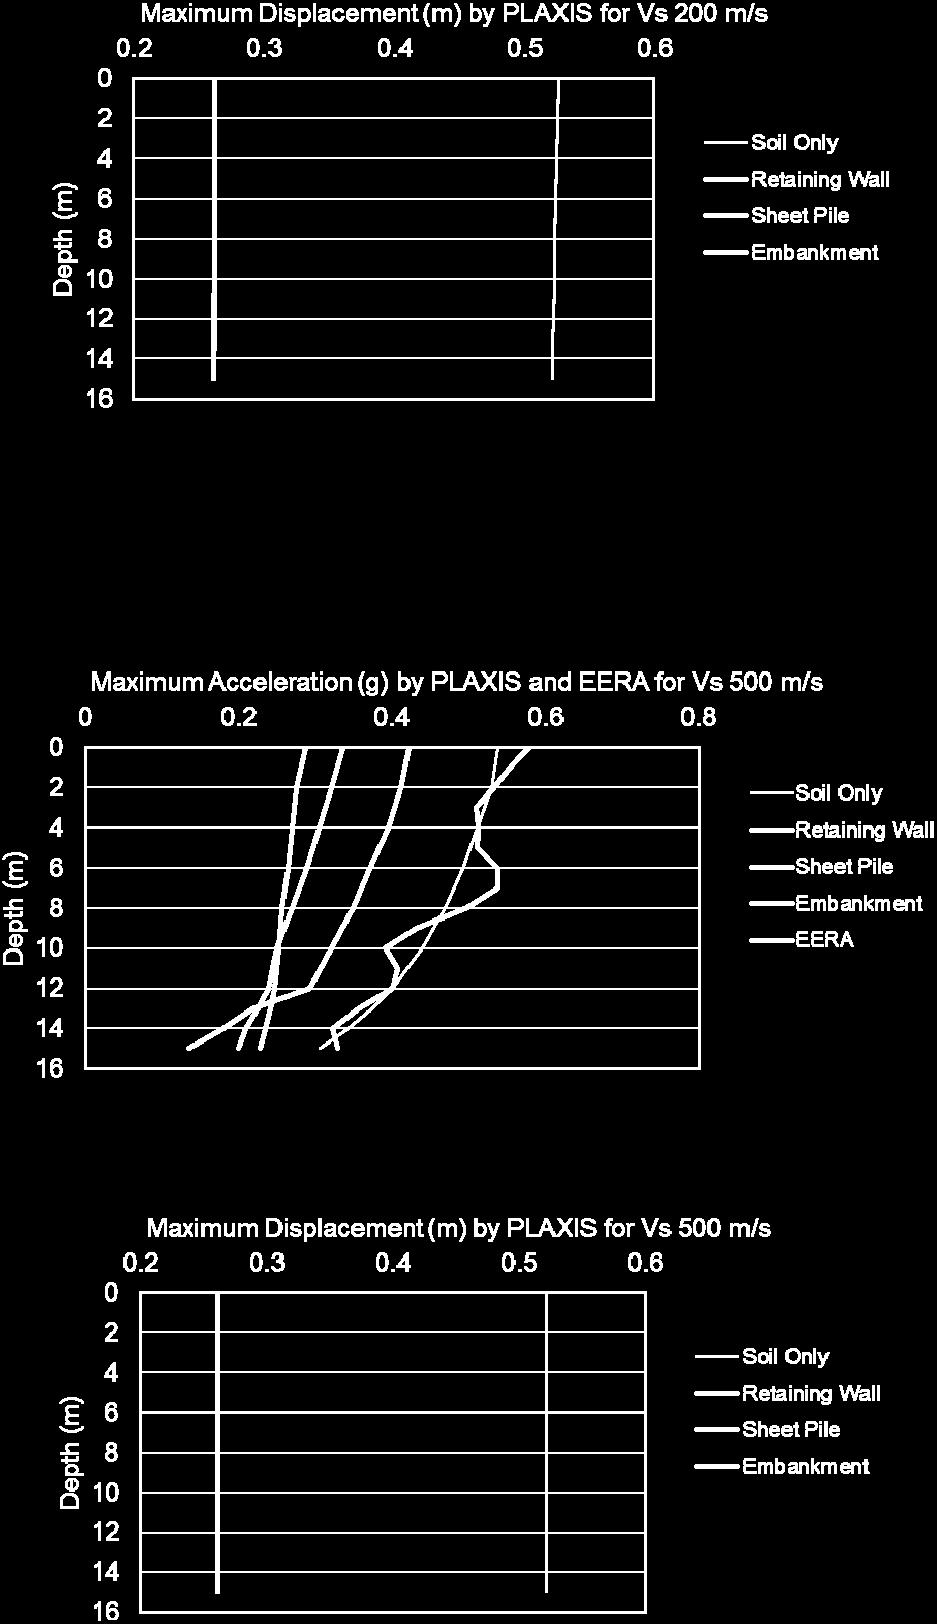 Maximum acceleration by Plaxis for case A.